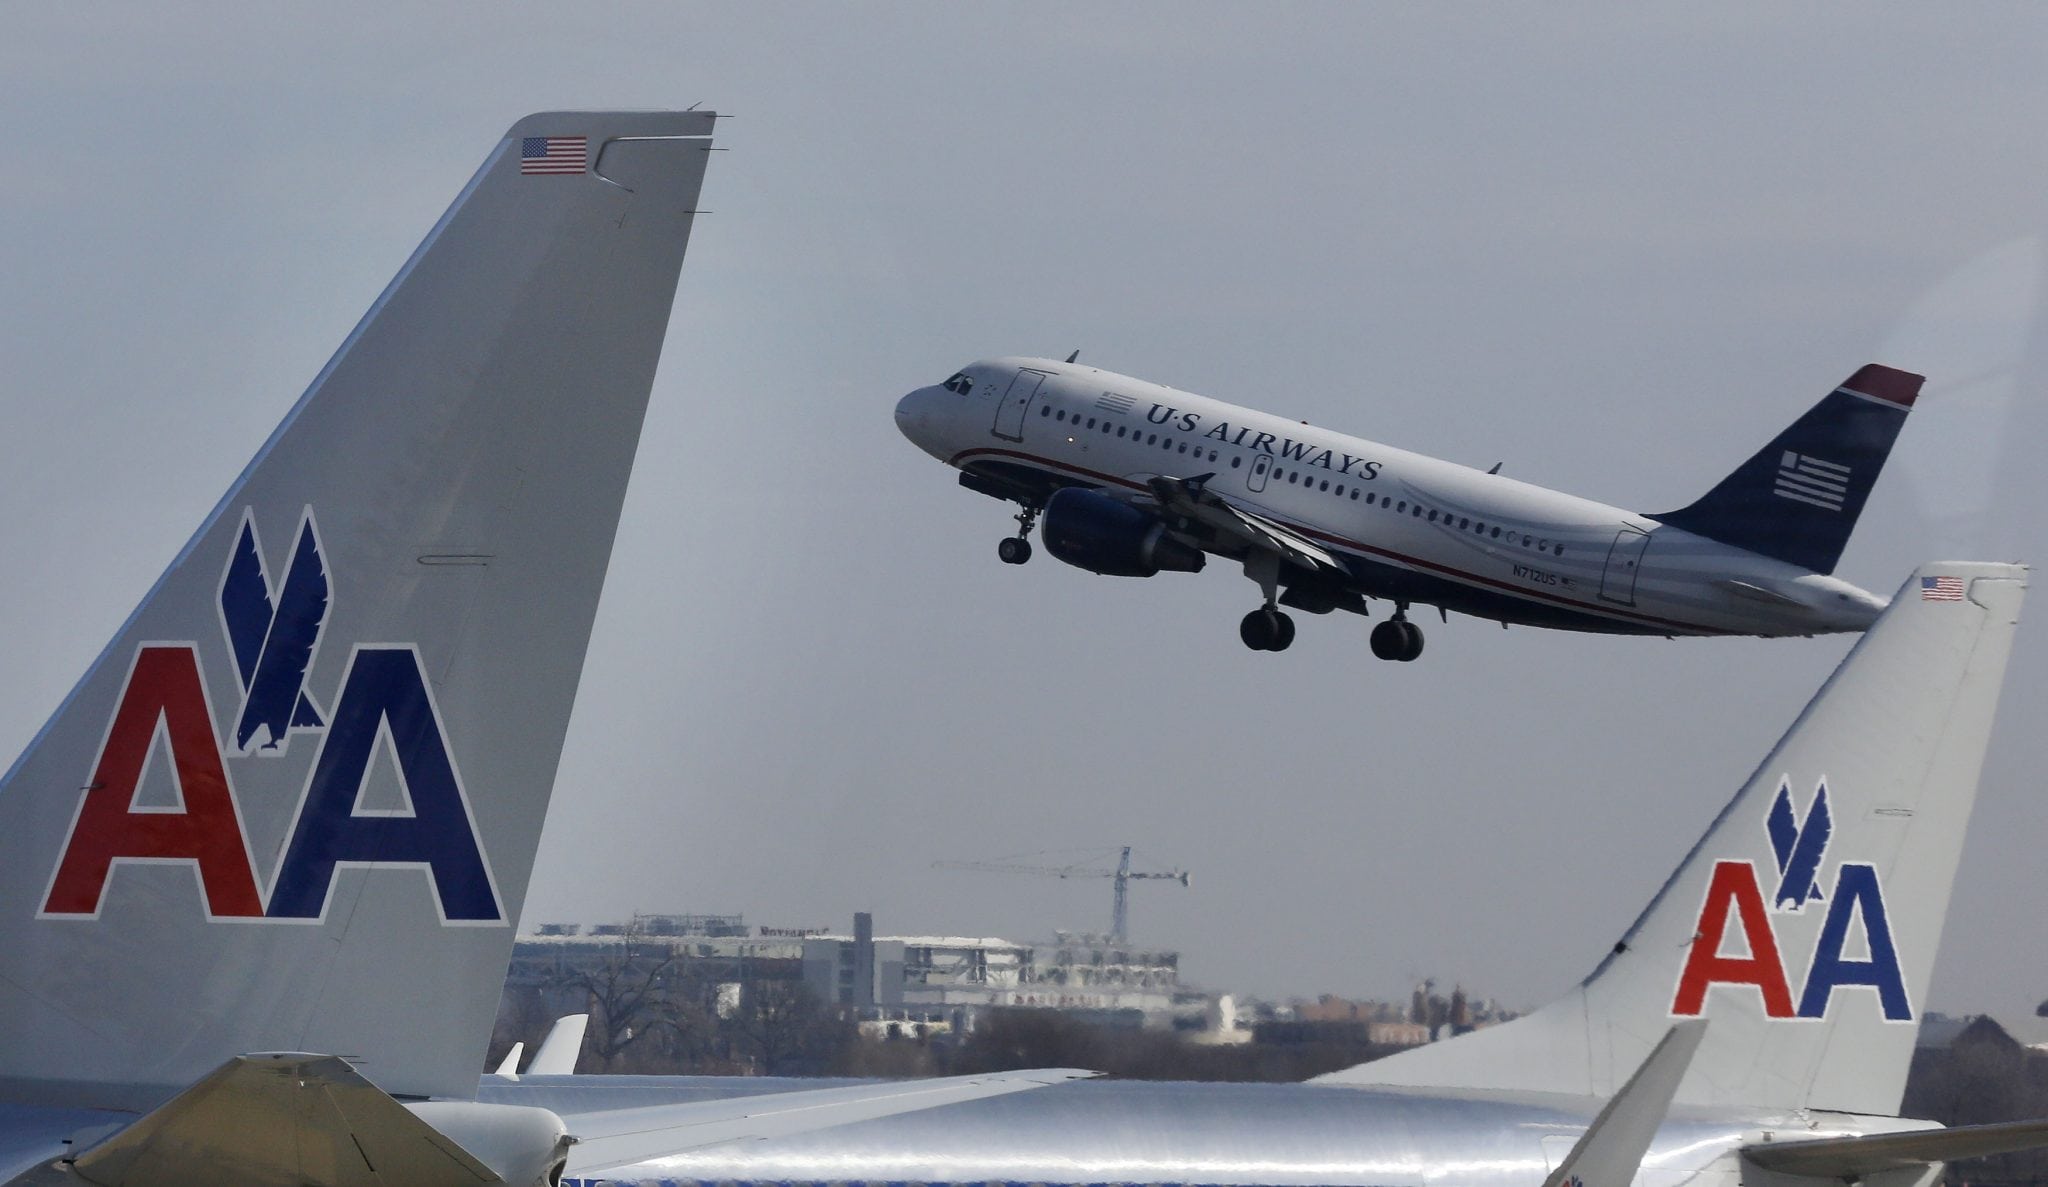 A U.S. Airways jet departs Washington's Reagan National Airport next to American Airlines jets outside Washington, February 25, 2013. 